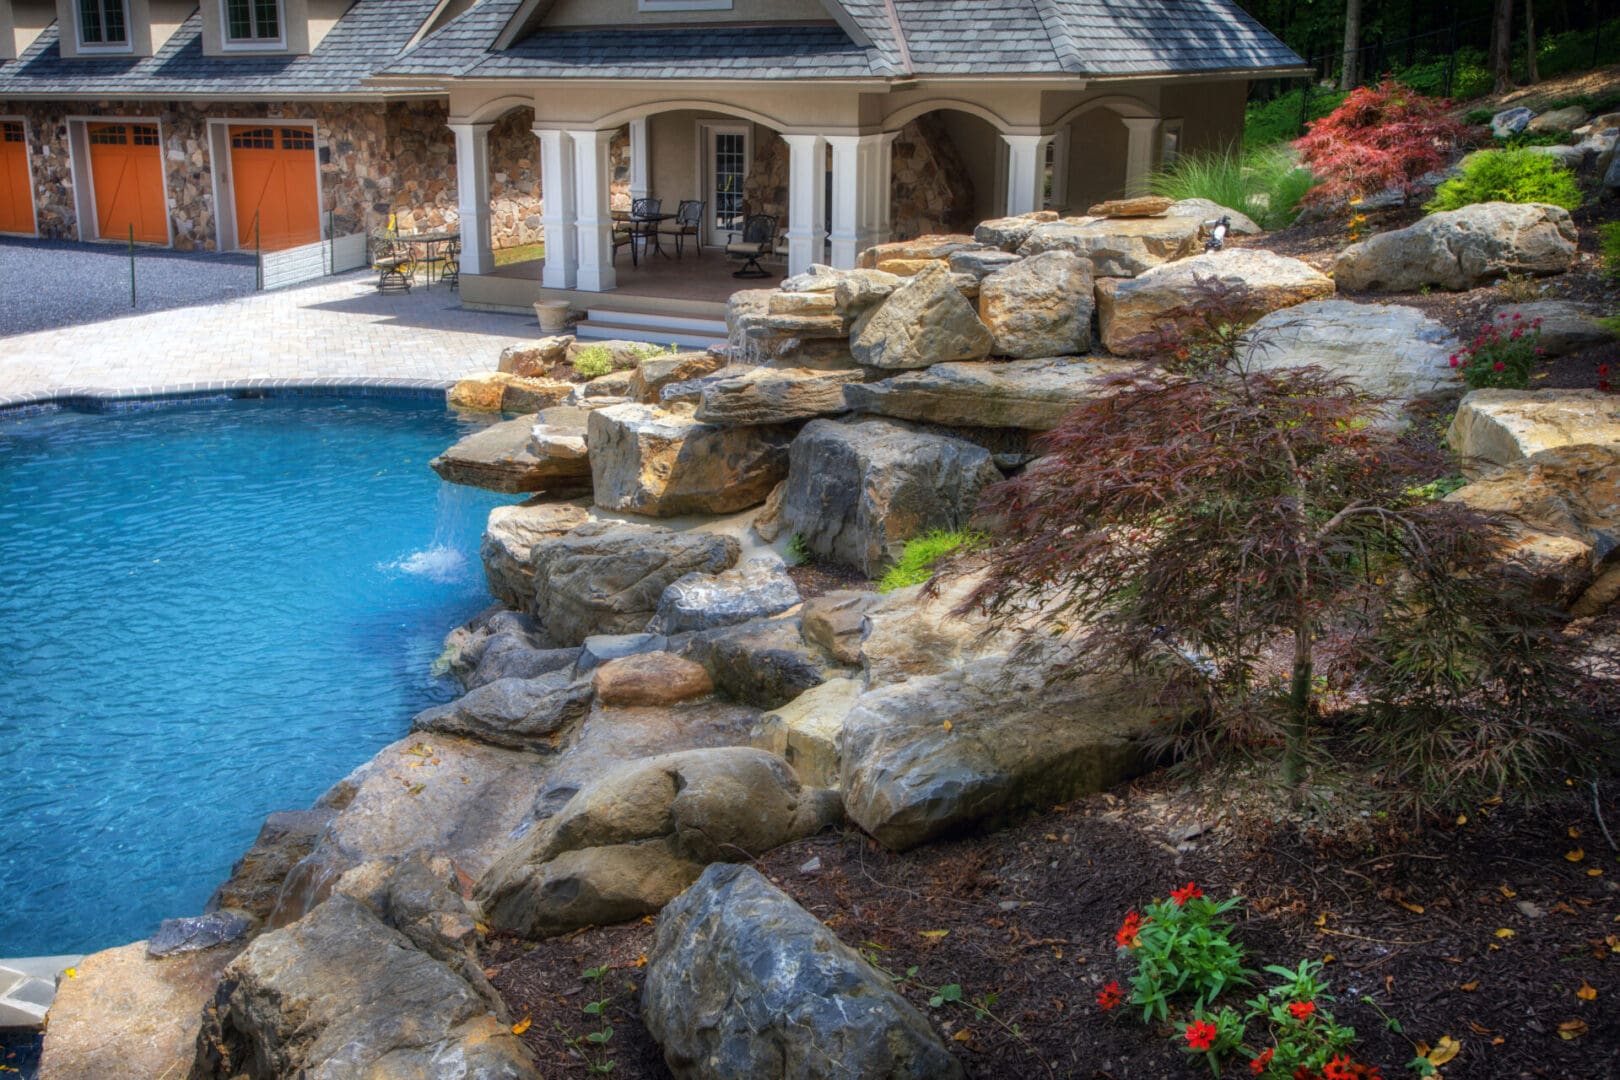 A backyard with a pool and landscaping featuring boulders.